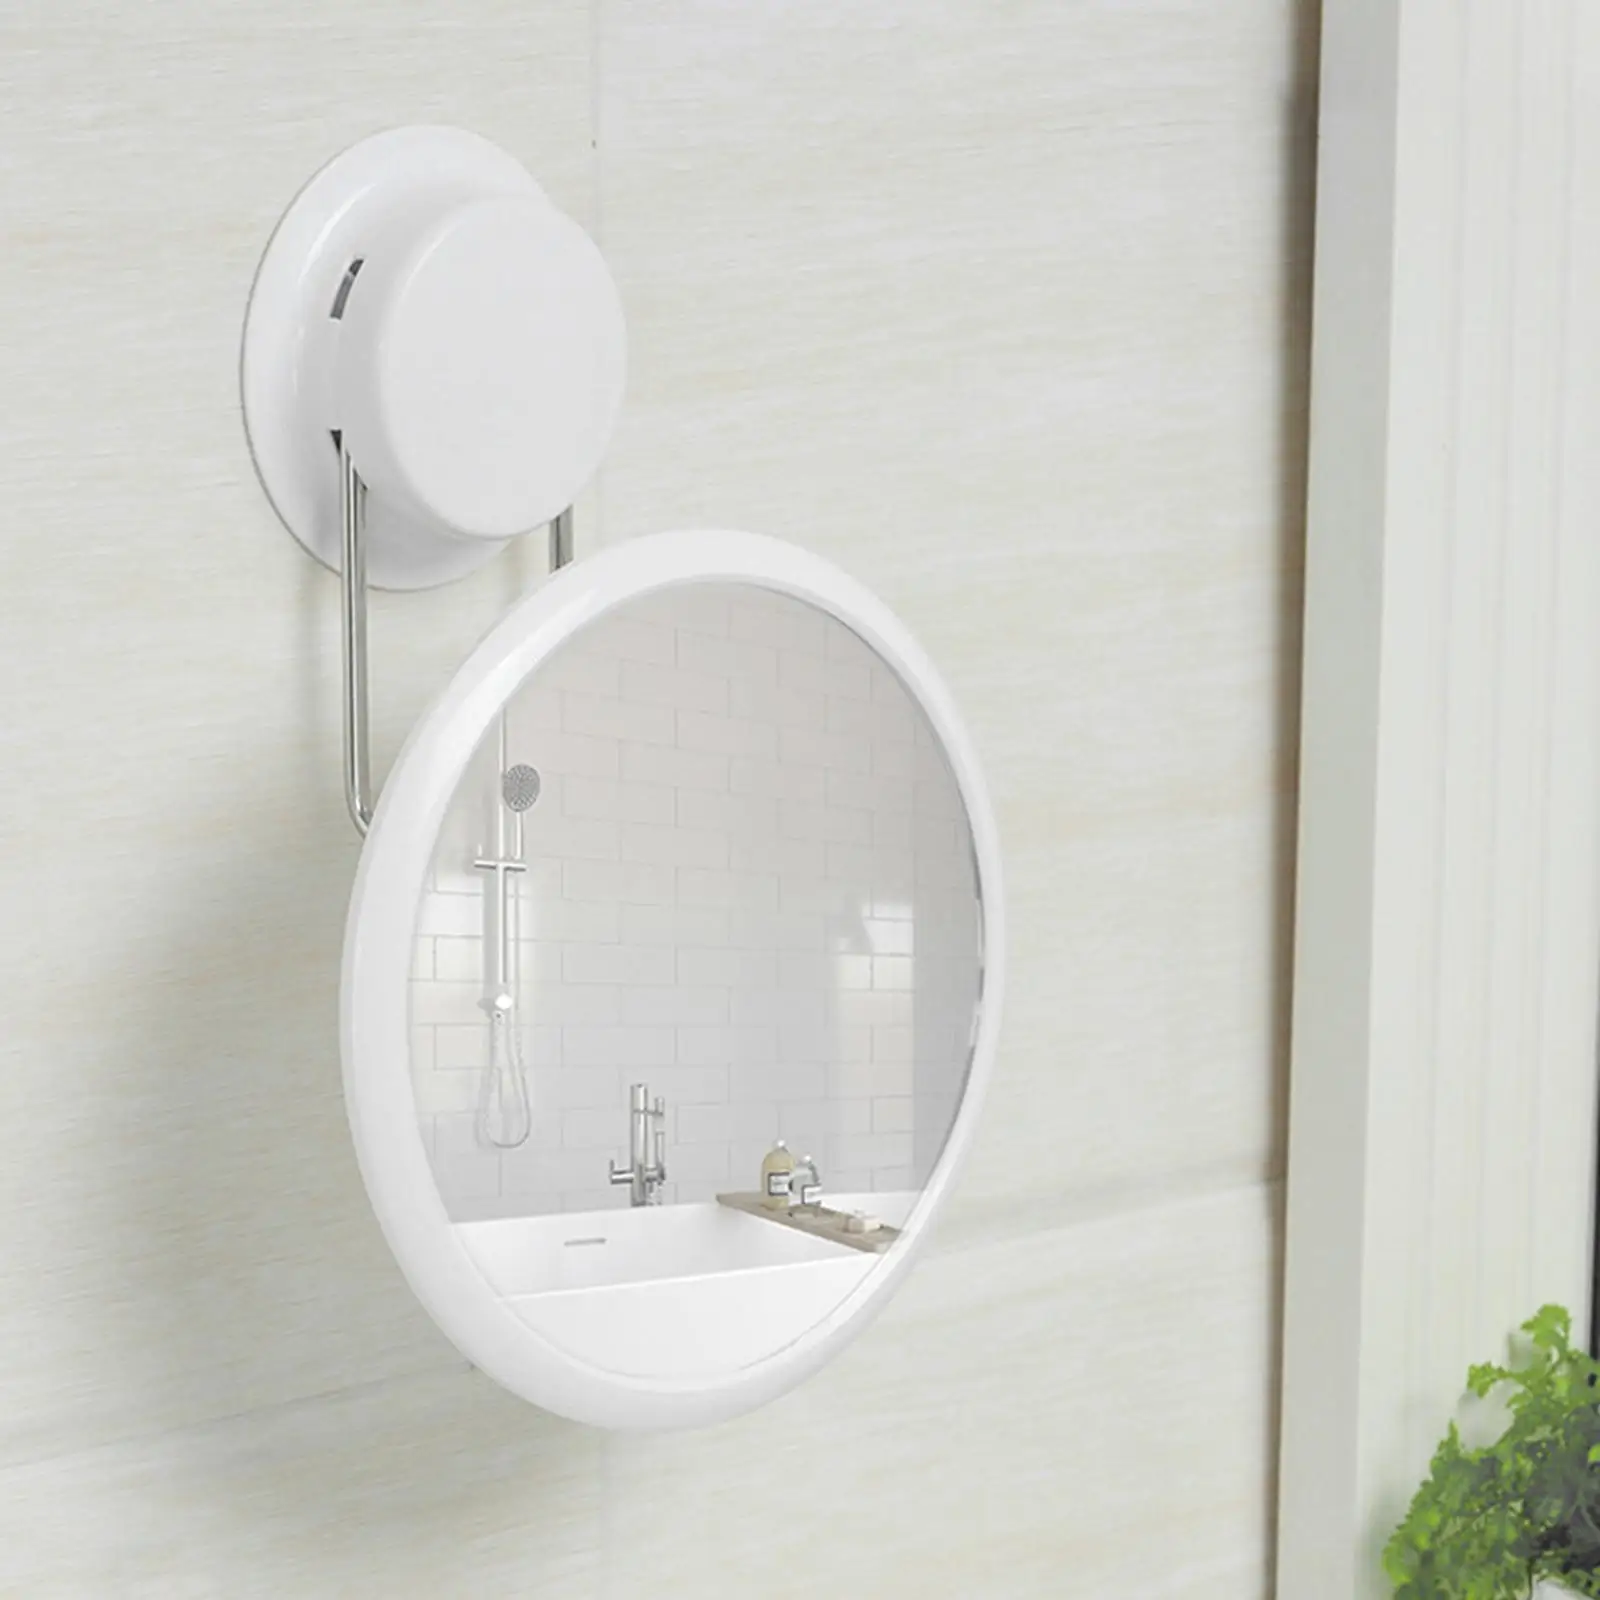 Wall Suction Bathroom Mirror Foldable Rotating Without Traces Waterproof No Drills Easy to Clean Mirror Plastic